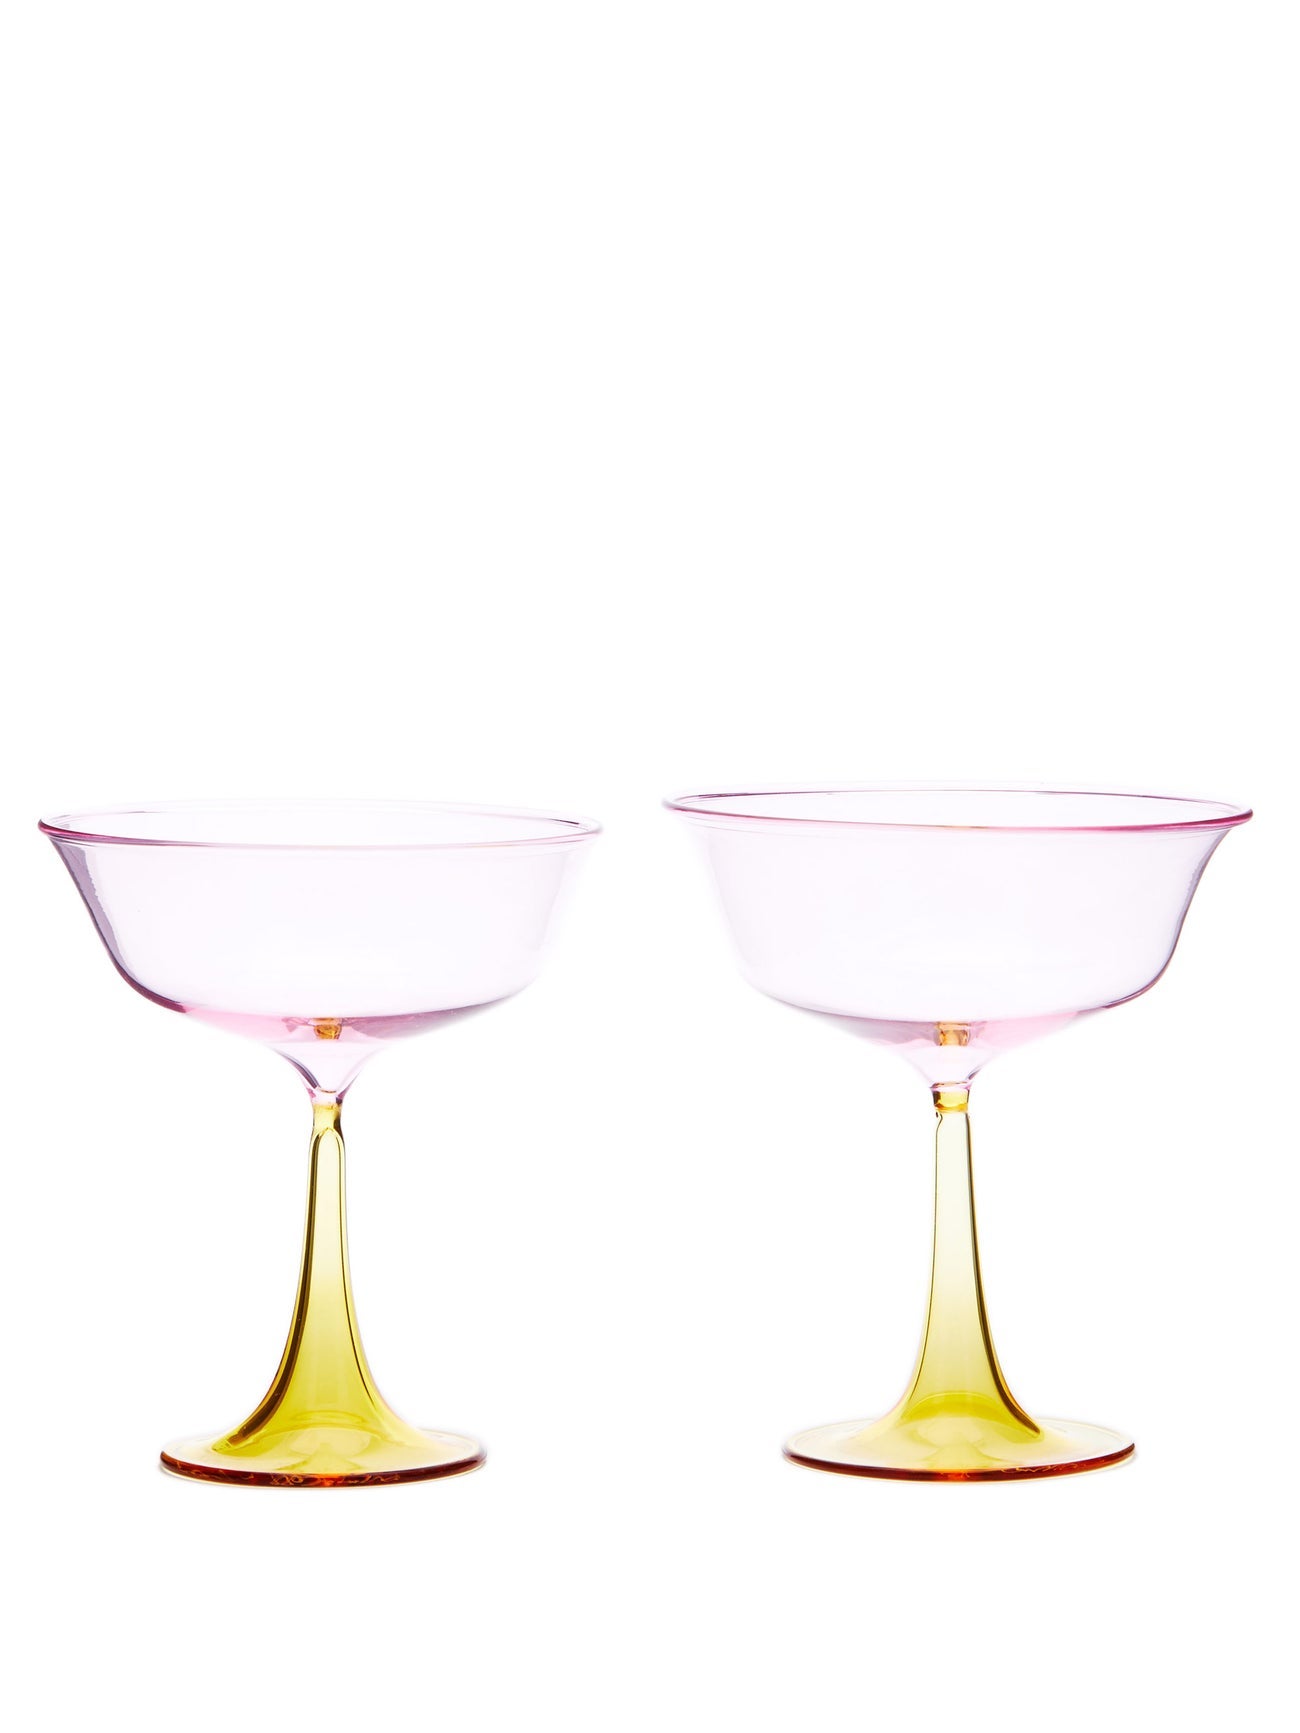 Two-Tone Coupes, Ribbed Vessels, and More Glasses Worthy of the Best Champagne